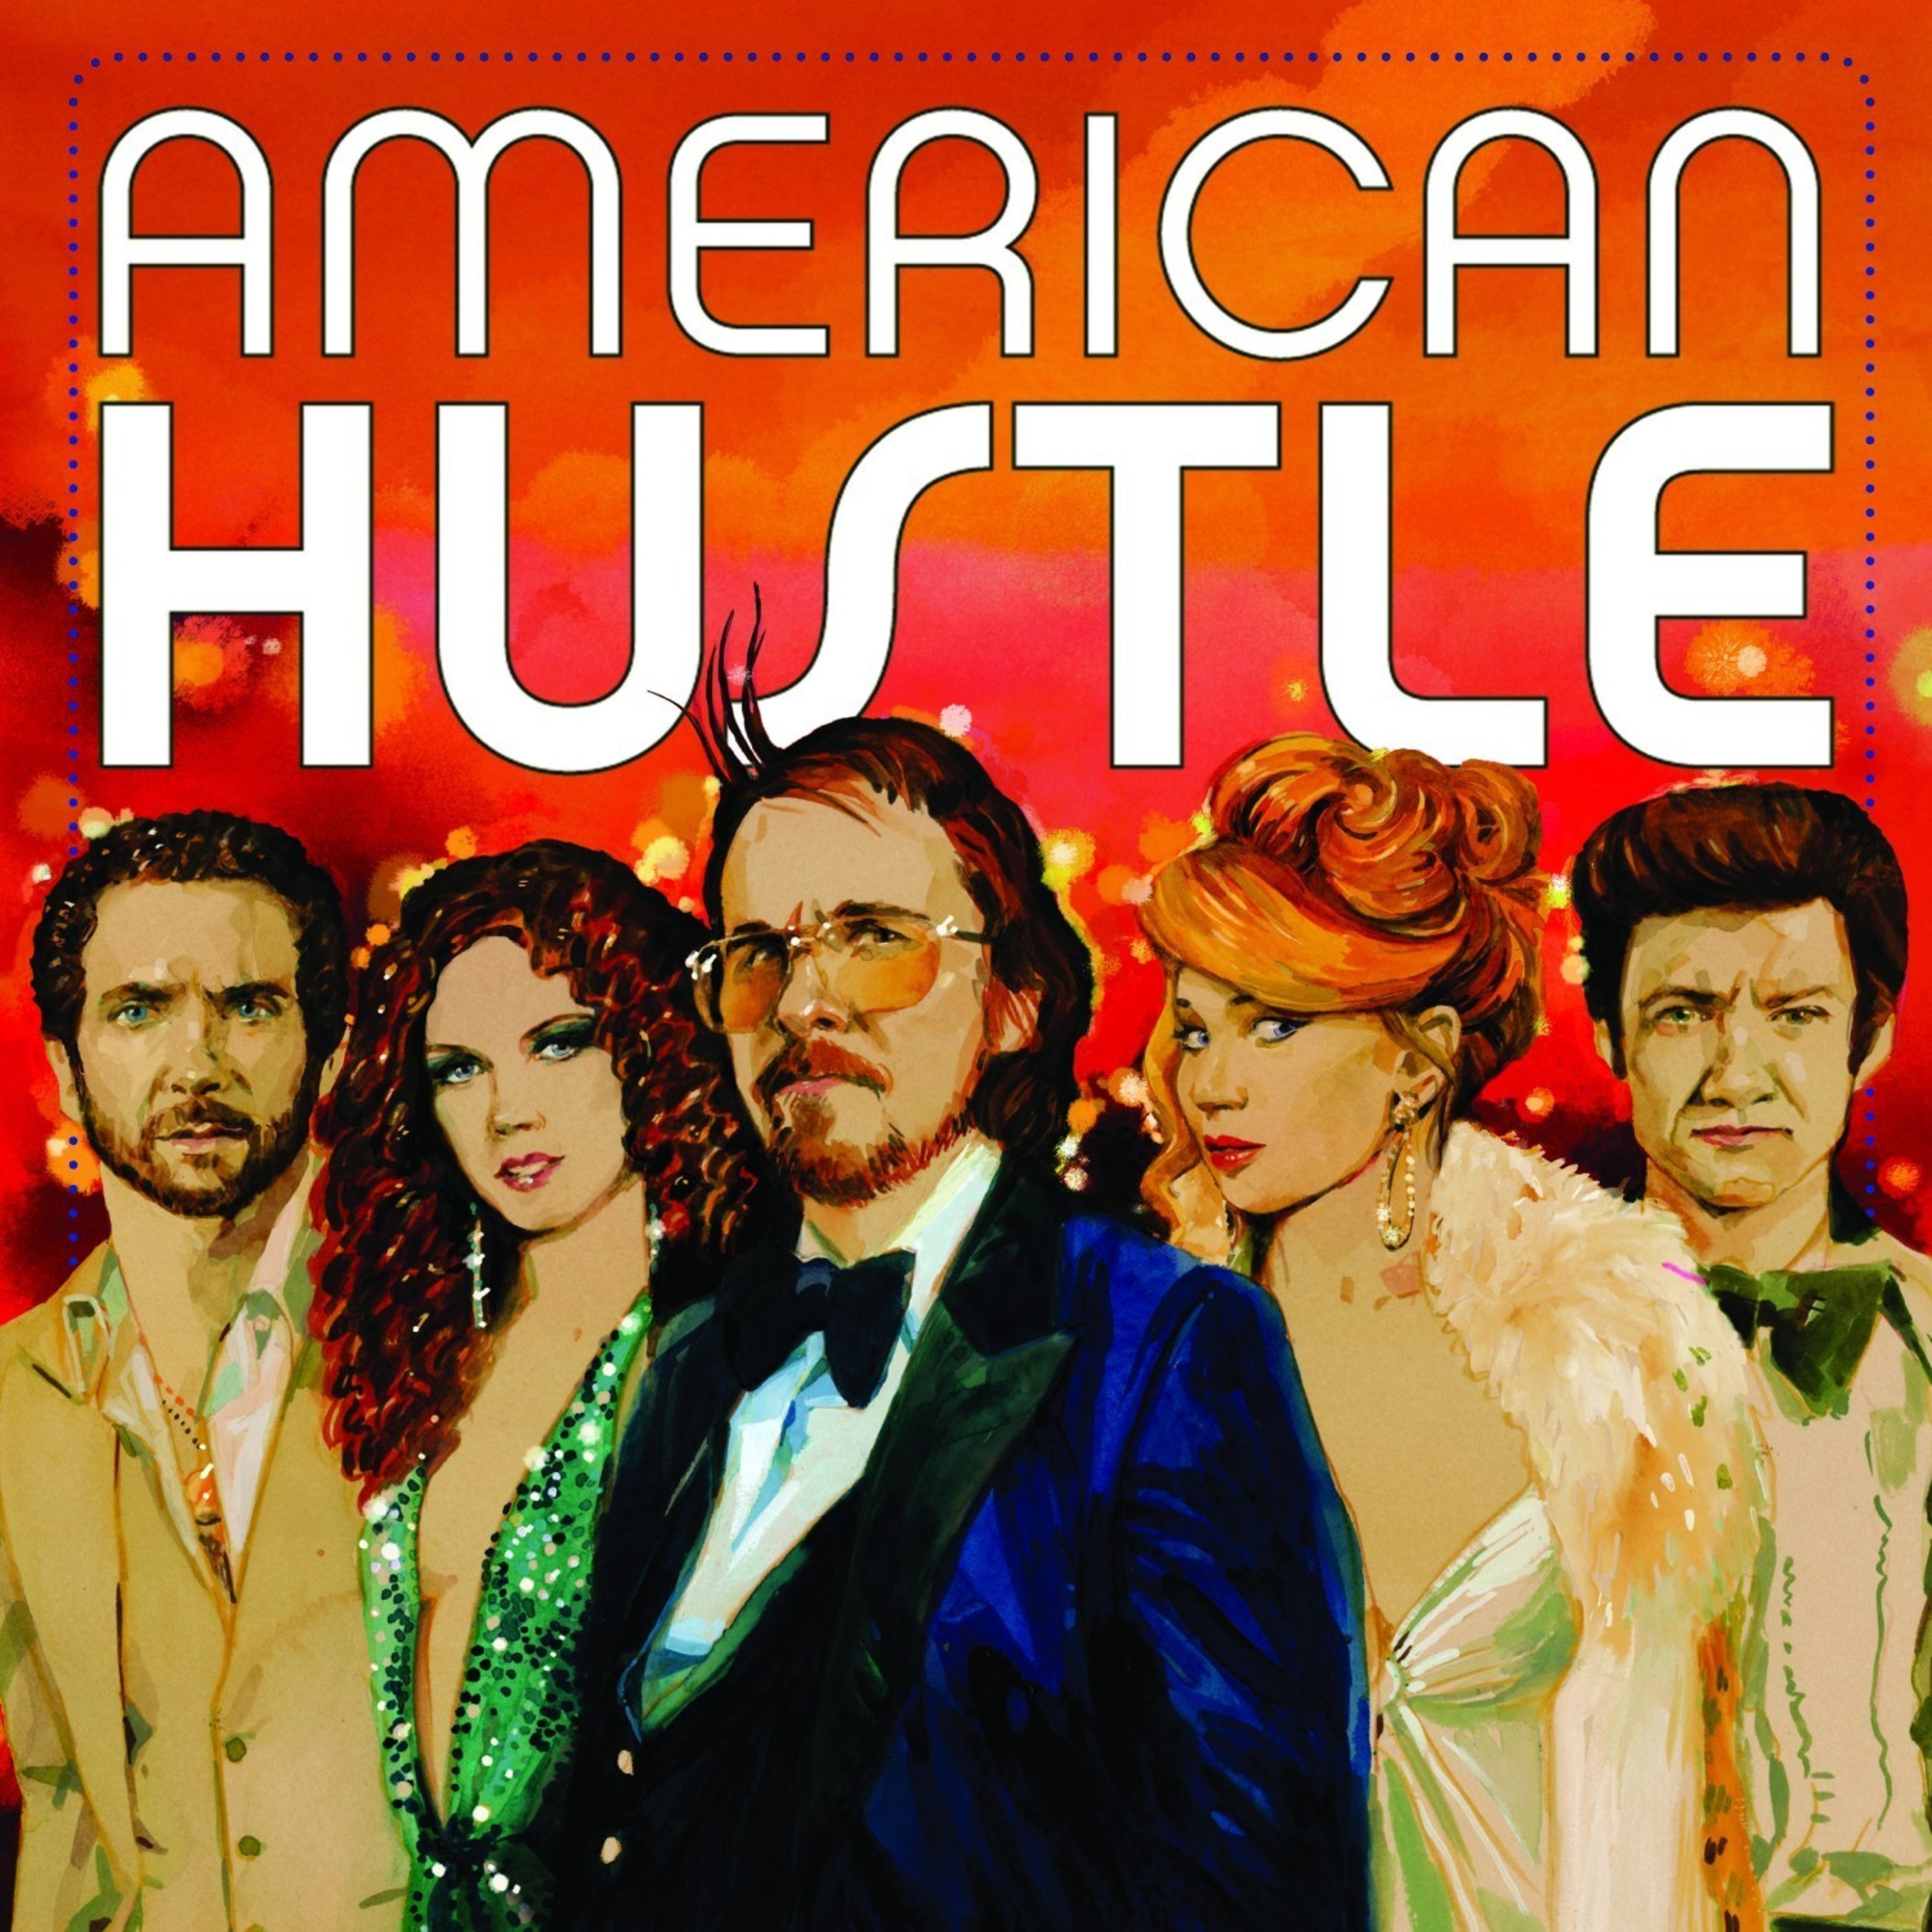 Madison Gate Records and Legacy Recordings are releasing American Hustle - Original Motion Picture Soundtrack, a collection of music from the critically-acclaimed box office hit with ten Oscar-nominations, in a two 12" LP gatefold blue and red colored 150 gram vinyl edition featuring six songs from the movie not included on the CD version. The 12" Vinyl will be available exclusively at independent retailers, as part of Record Store Day's annual Black Friday event on November 28th, 2014.